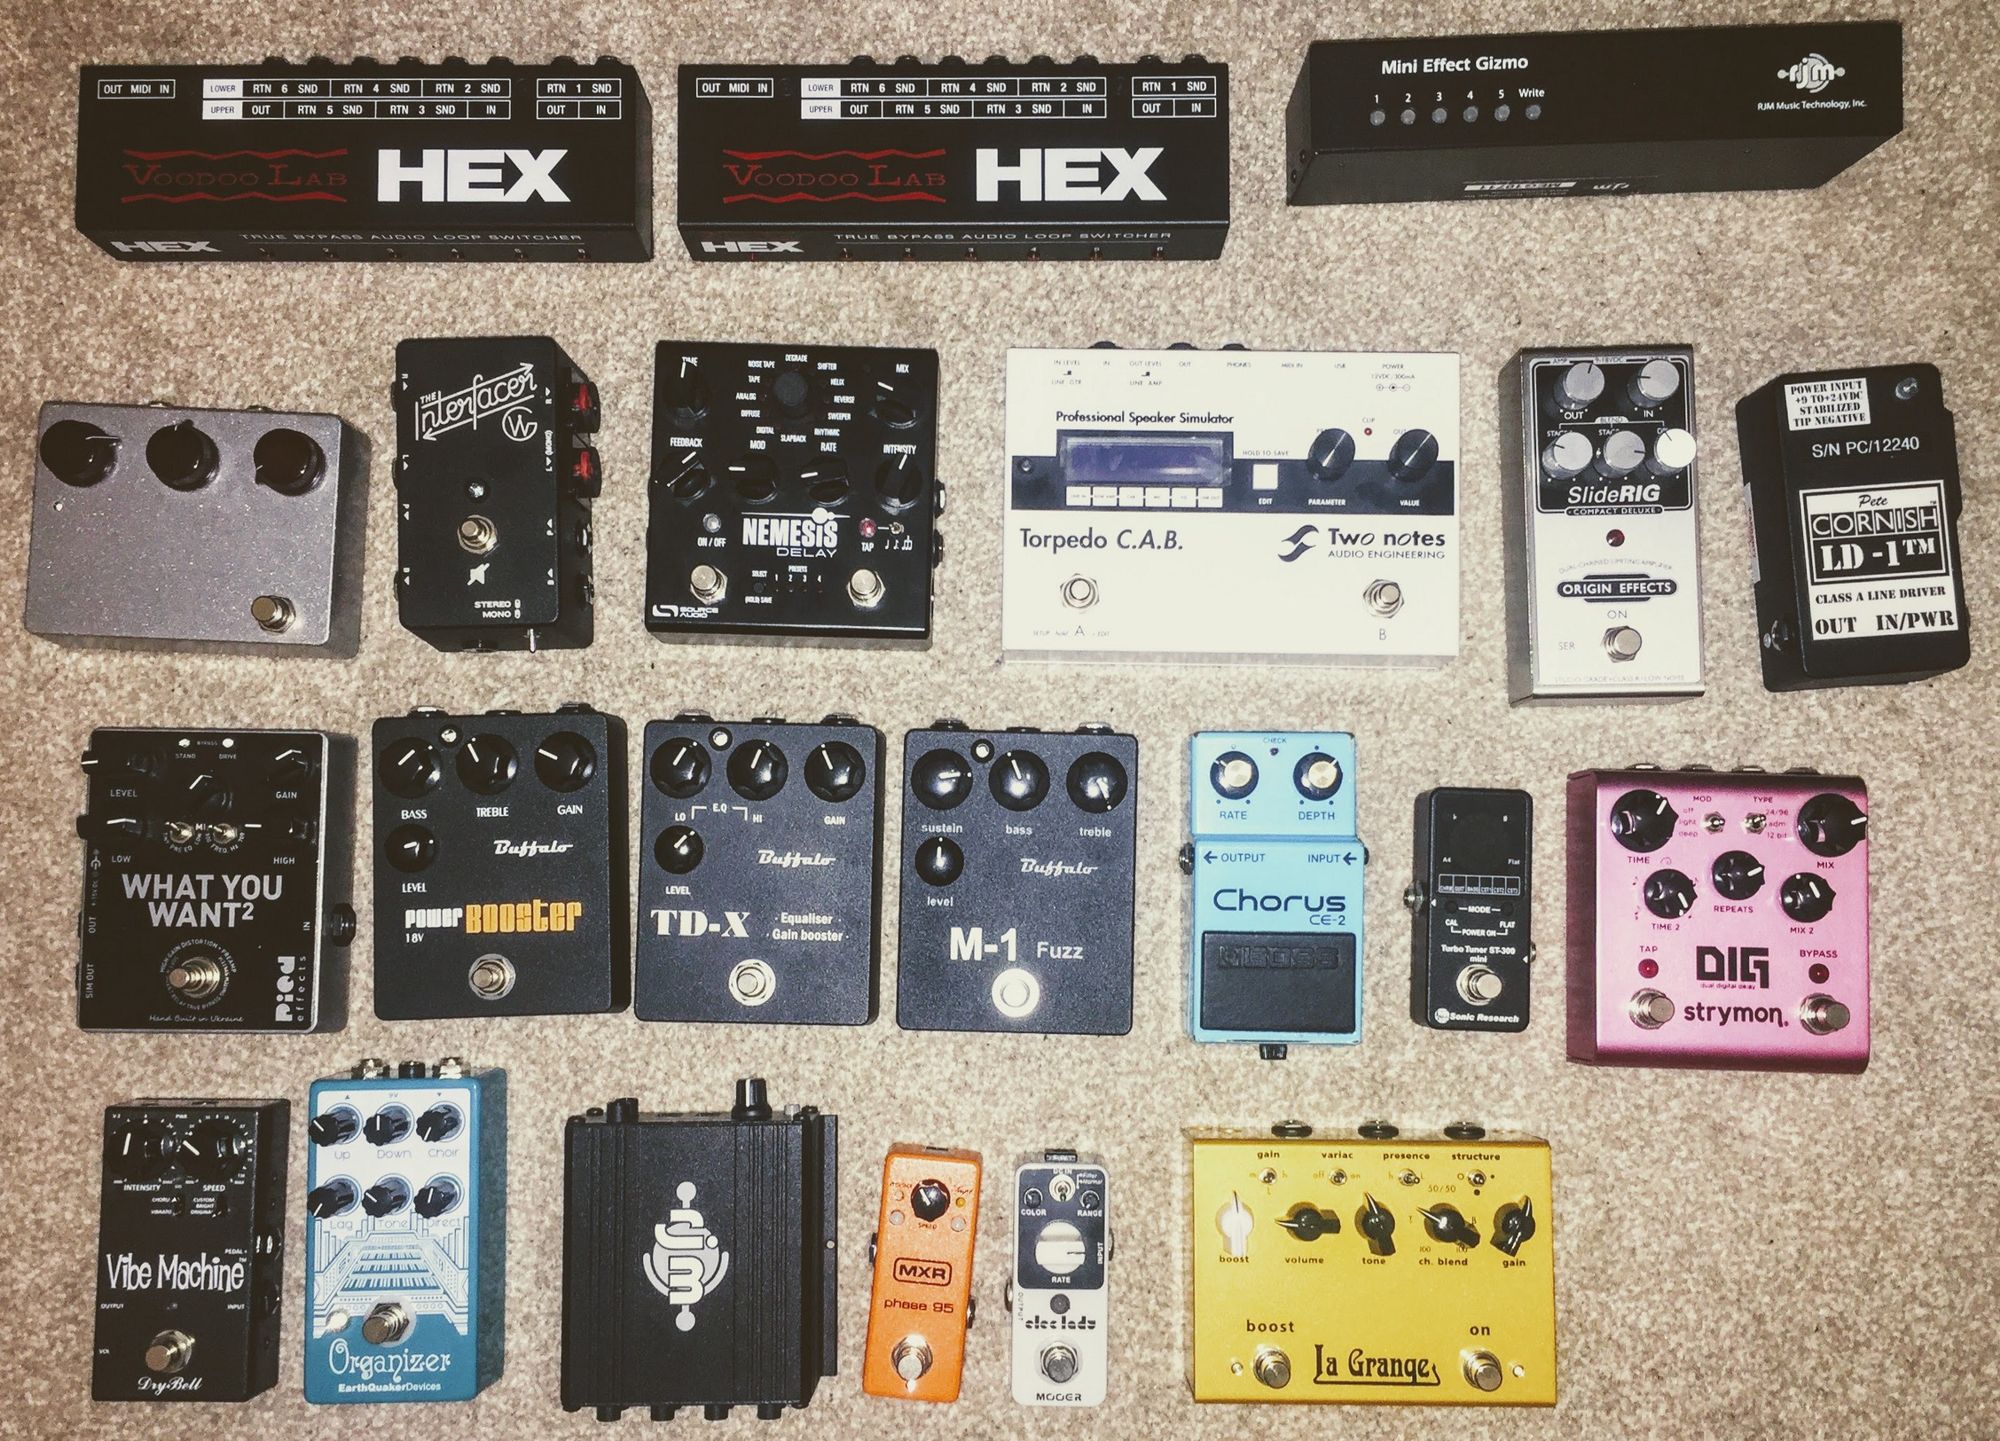 The culmination of my efforts to find the ultimate set of pedals that define my sound.